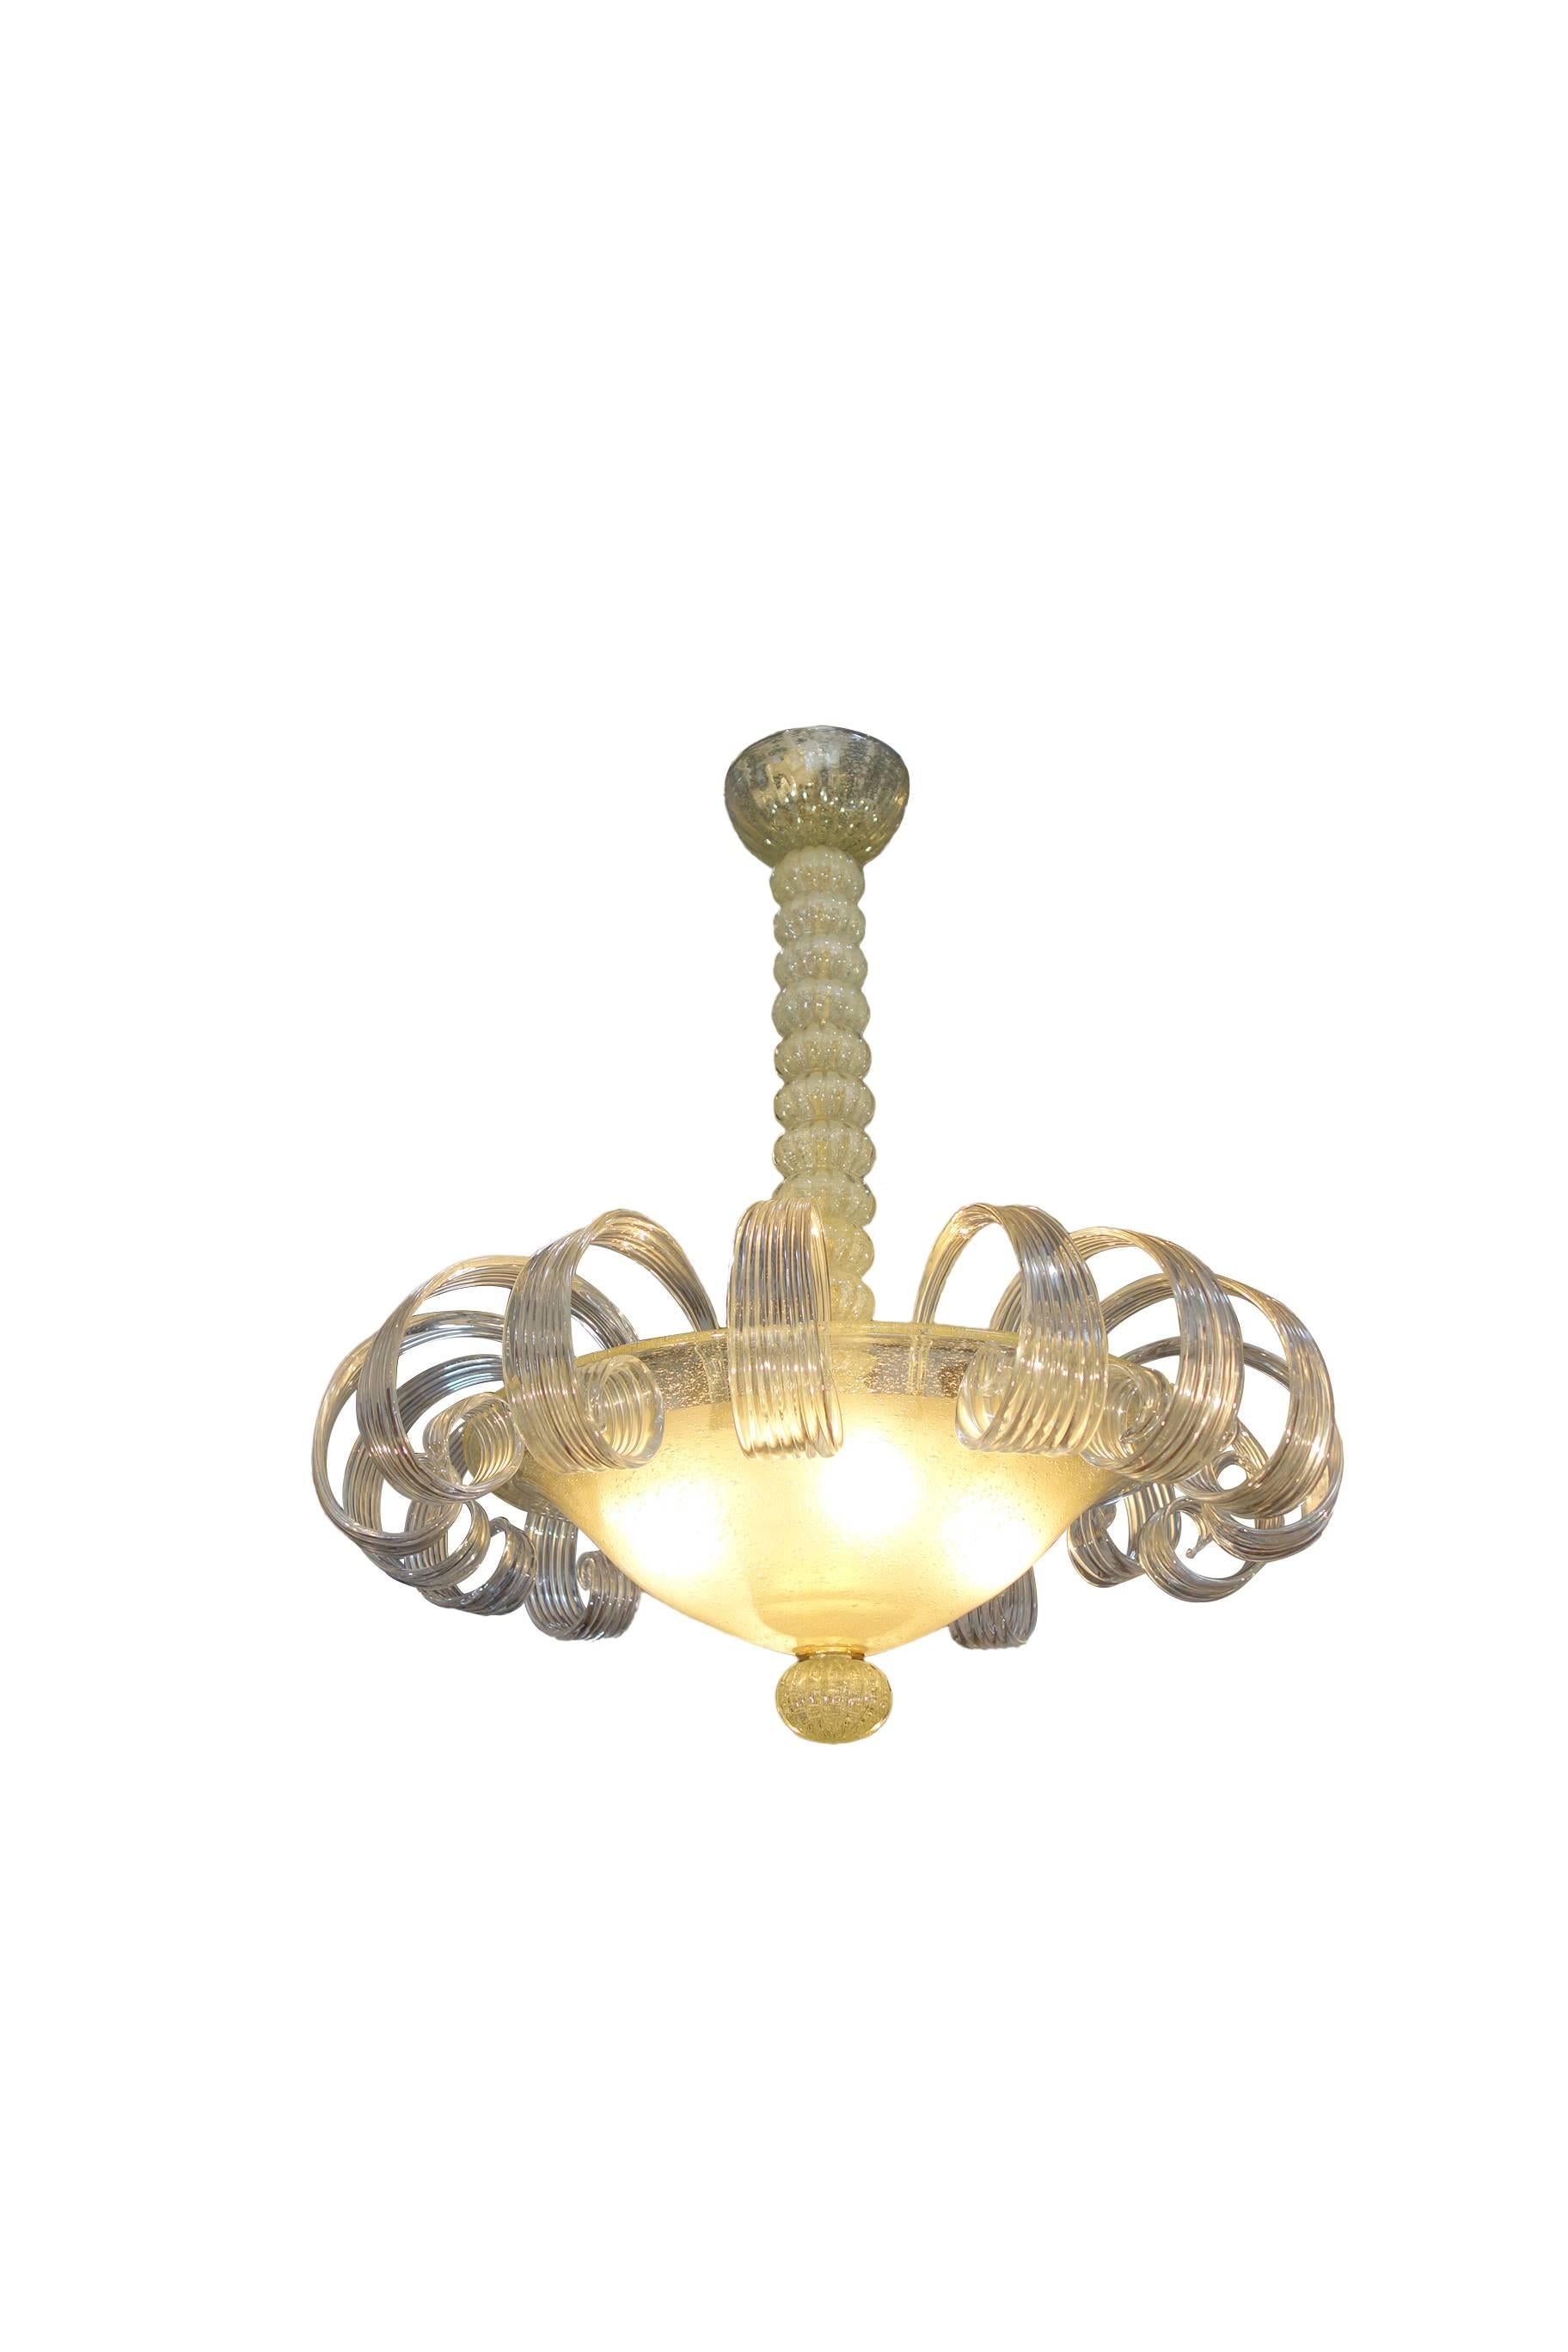 Spectacular vintage Murano Due chandelier, Venice Italy.
Frosted bubble art glass bowl suspends on gold finish bauble-shafted fixture, supporting 16 clear and ribbon-curled "eyelash" petals - producing a soft golden hue from the center of